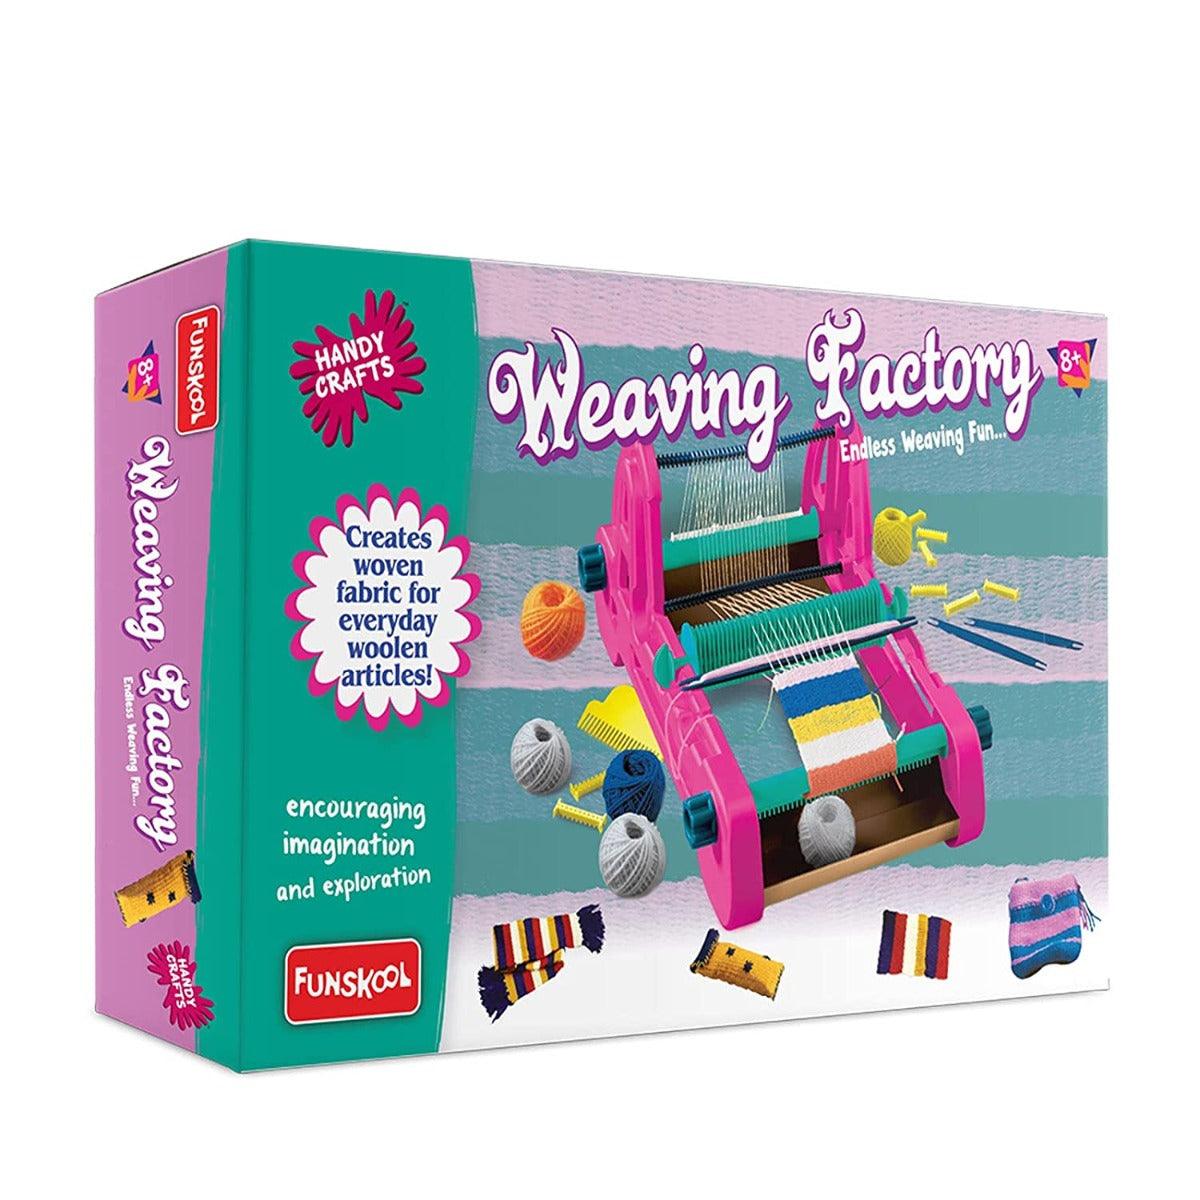 Funskool Handycrafts Weaving Factory - Portable Weaving Machine for Ages 8 Years and Up